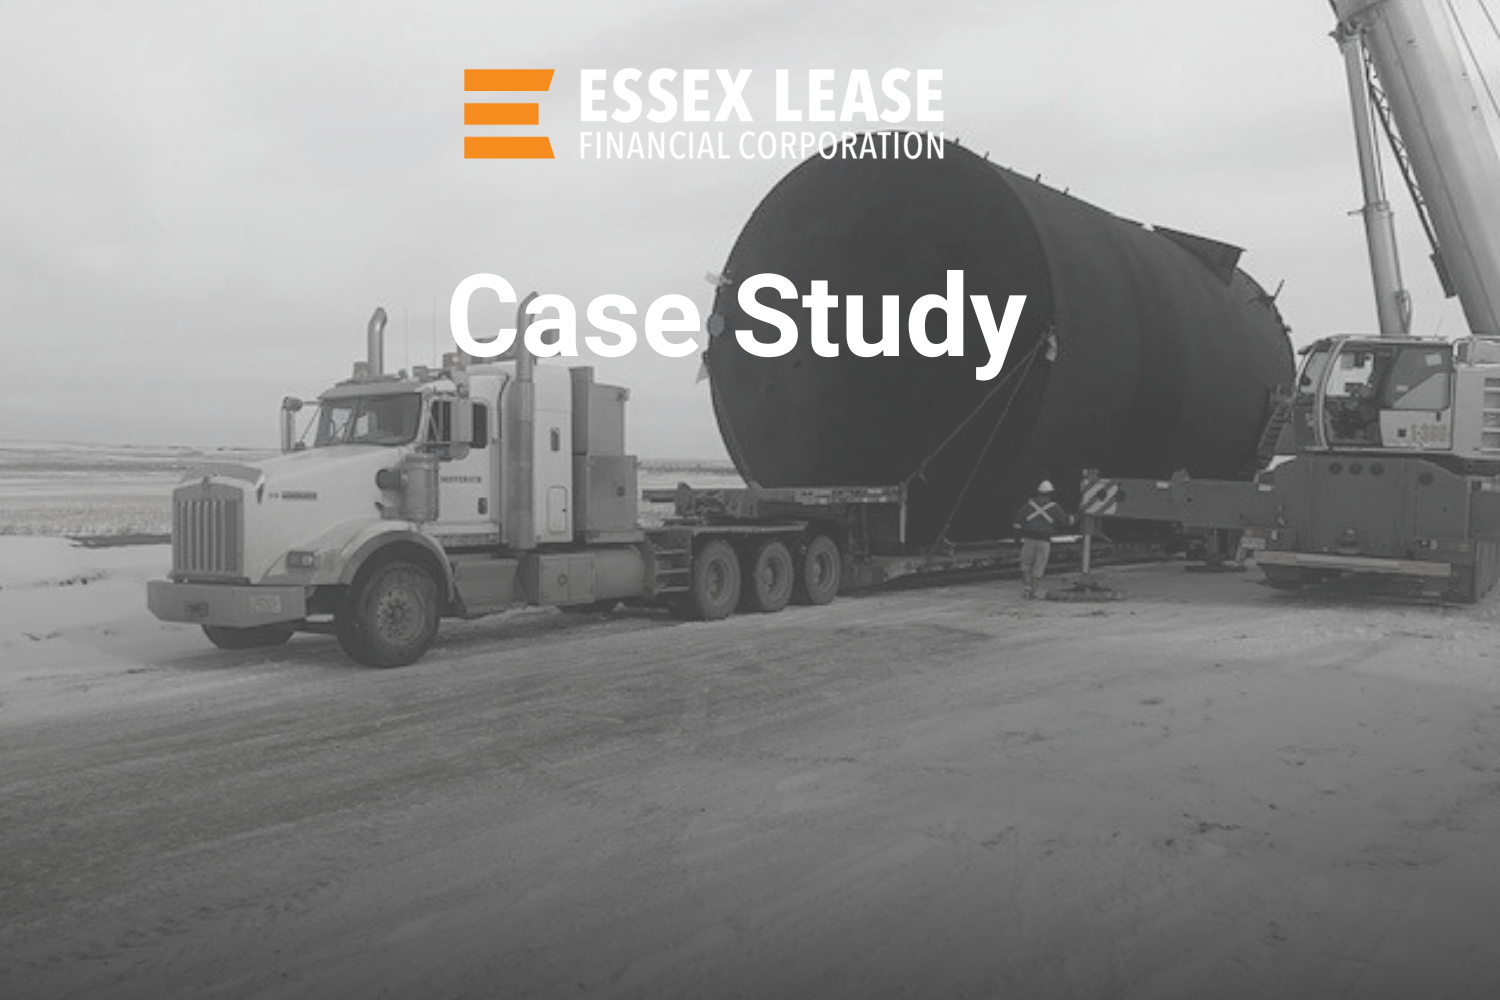 Case Study: Mike Schnell and Maverick Oilfield – One Business Owner’s Advice On the Importance of Your Lending Partnerships — Essex Lease Financial Corporation